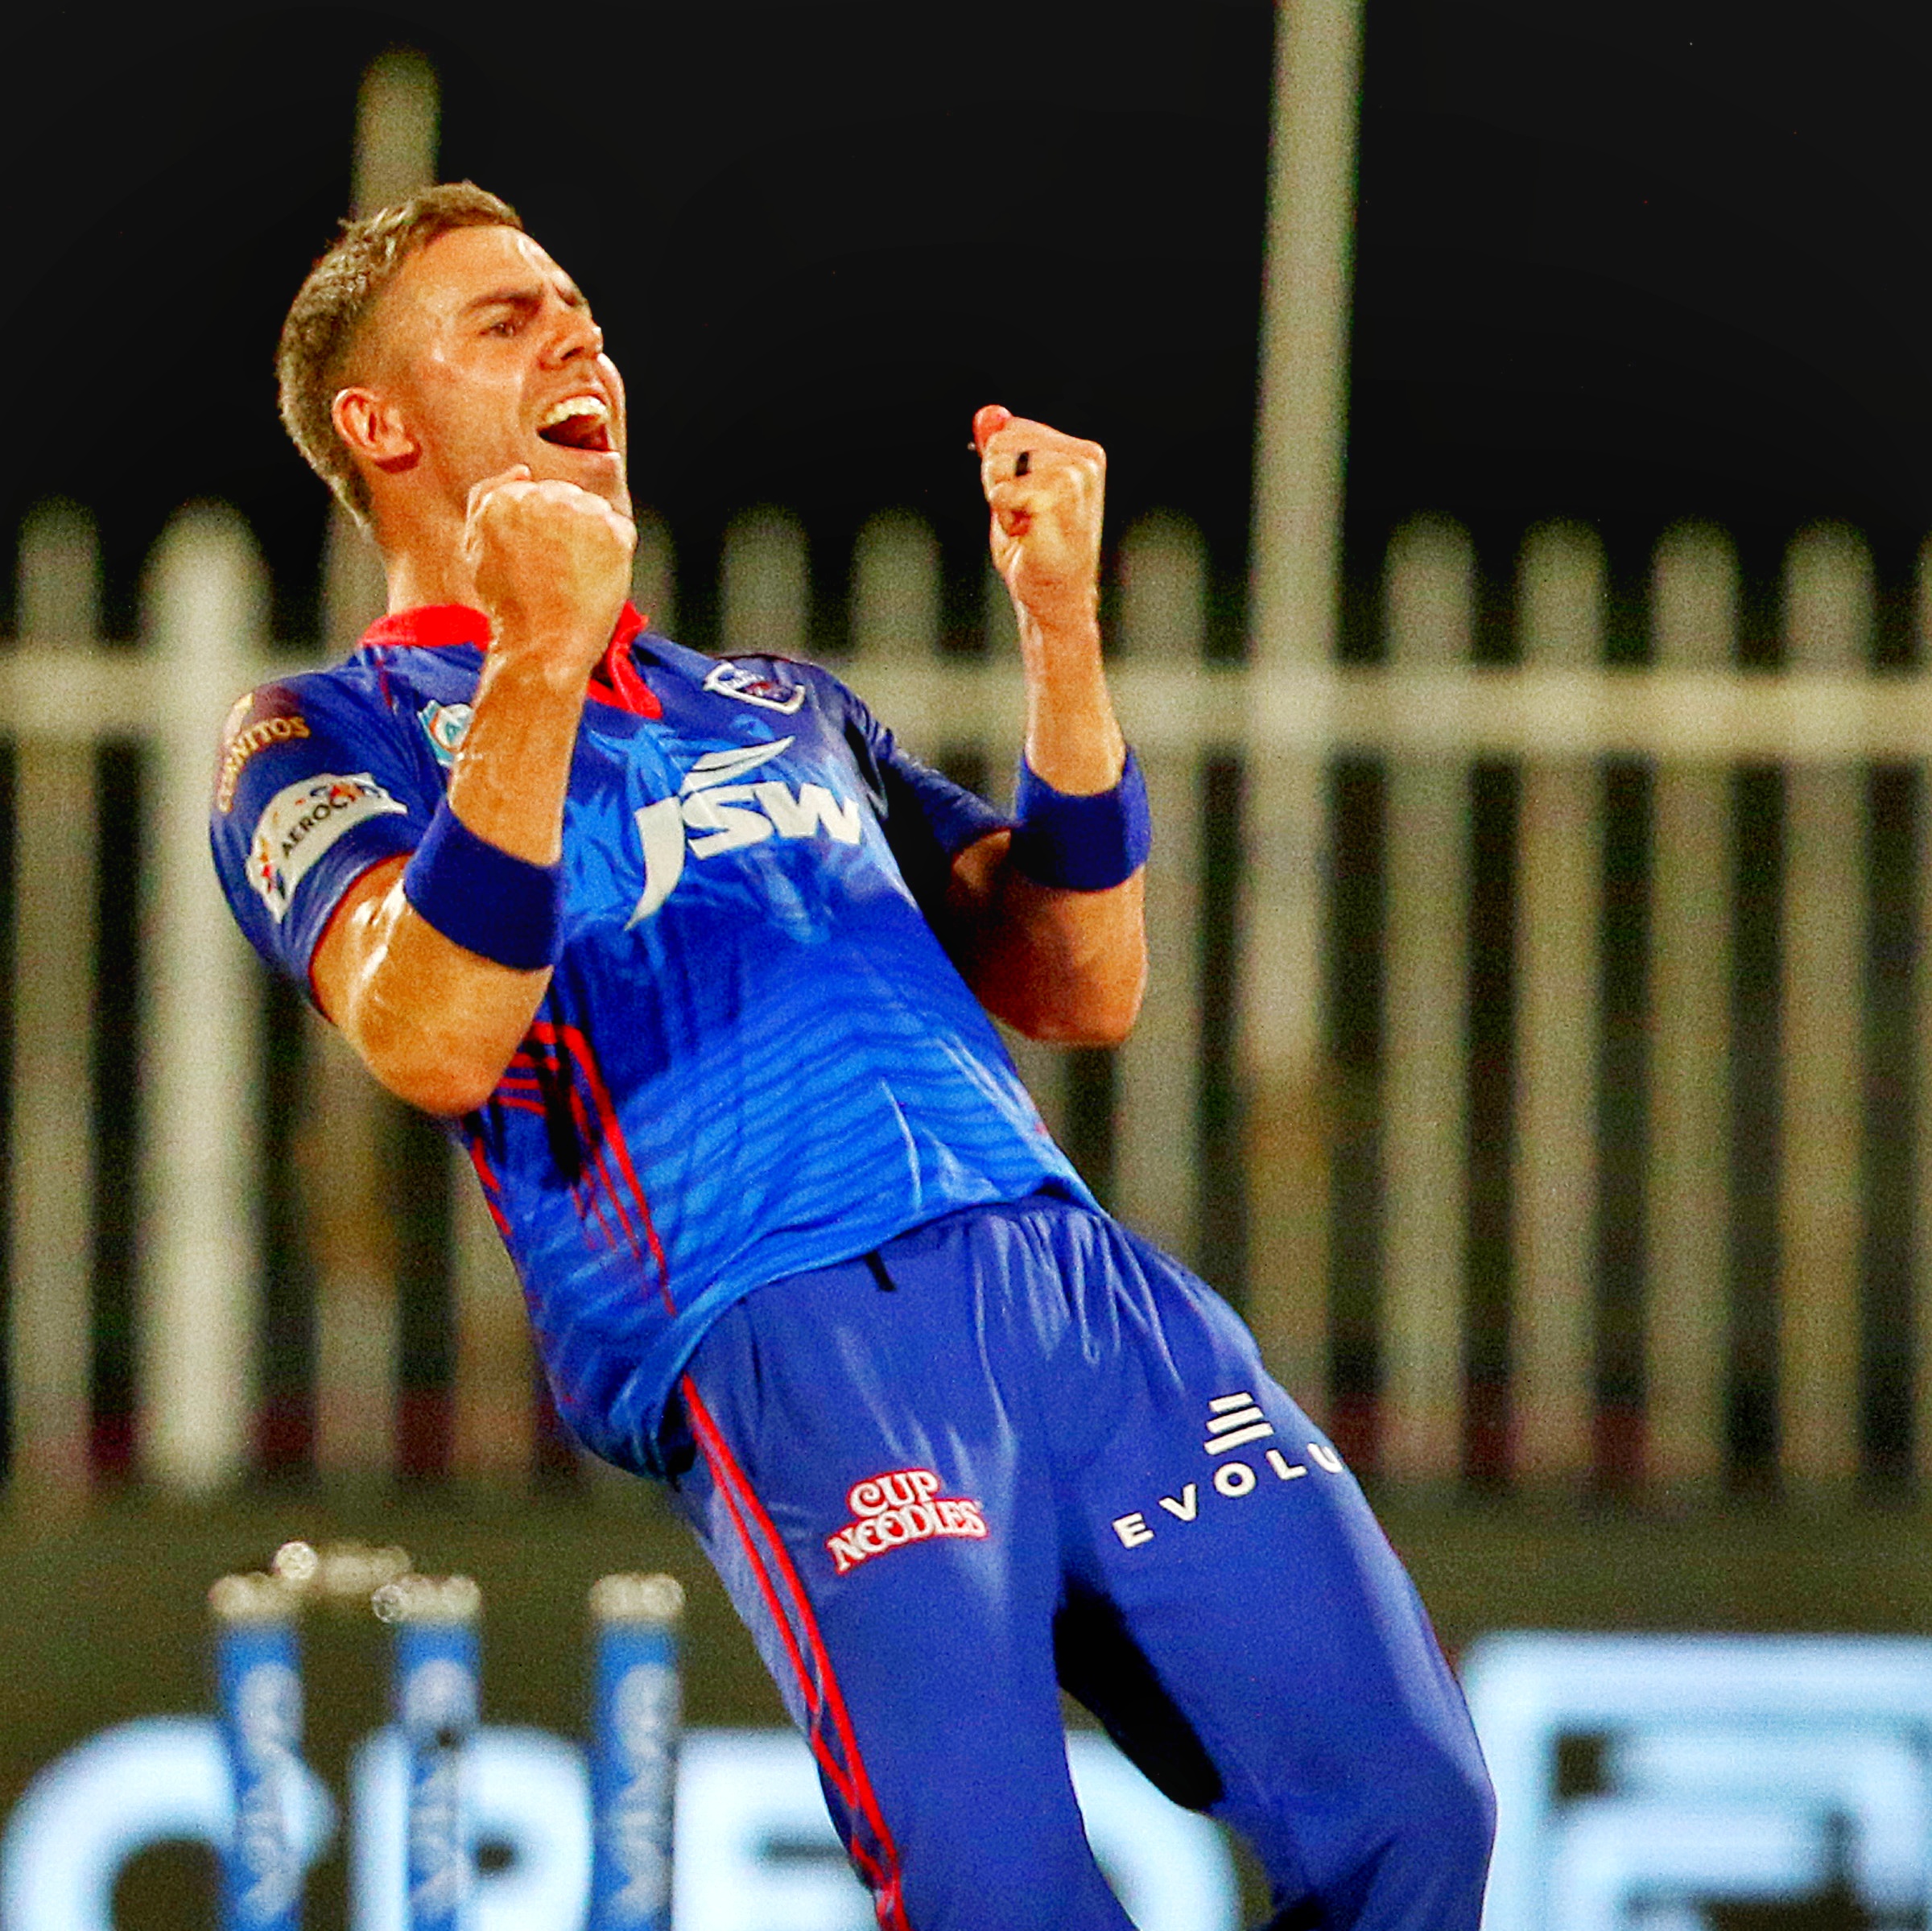 IPL 2021: Anrich Nortje proud of what Delhi Capitals achieved, expresses disappointment at not winning the trophy